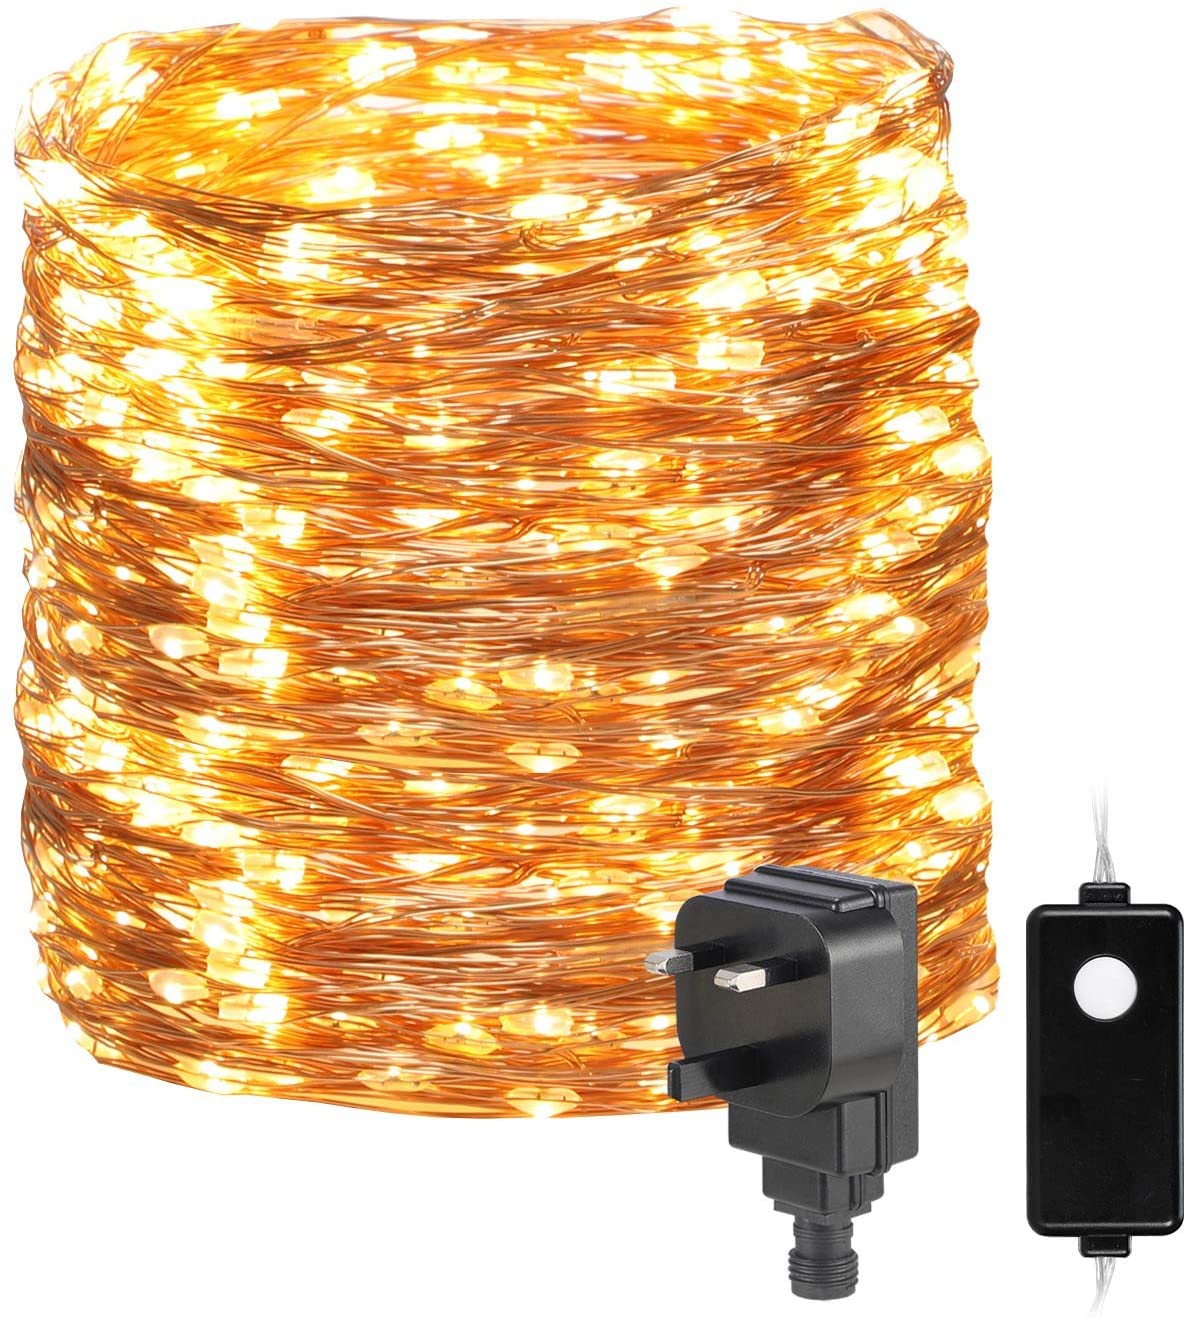 30M/98ft Fairy Lights Mains Powered-OxyLED 300 LED 8 Modes Fairy String Lights Indoor Copper String Lights for Patio Garden Home Wedding Party Decoration Warmwhite